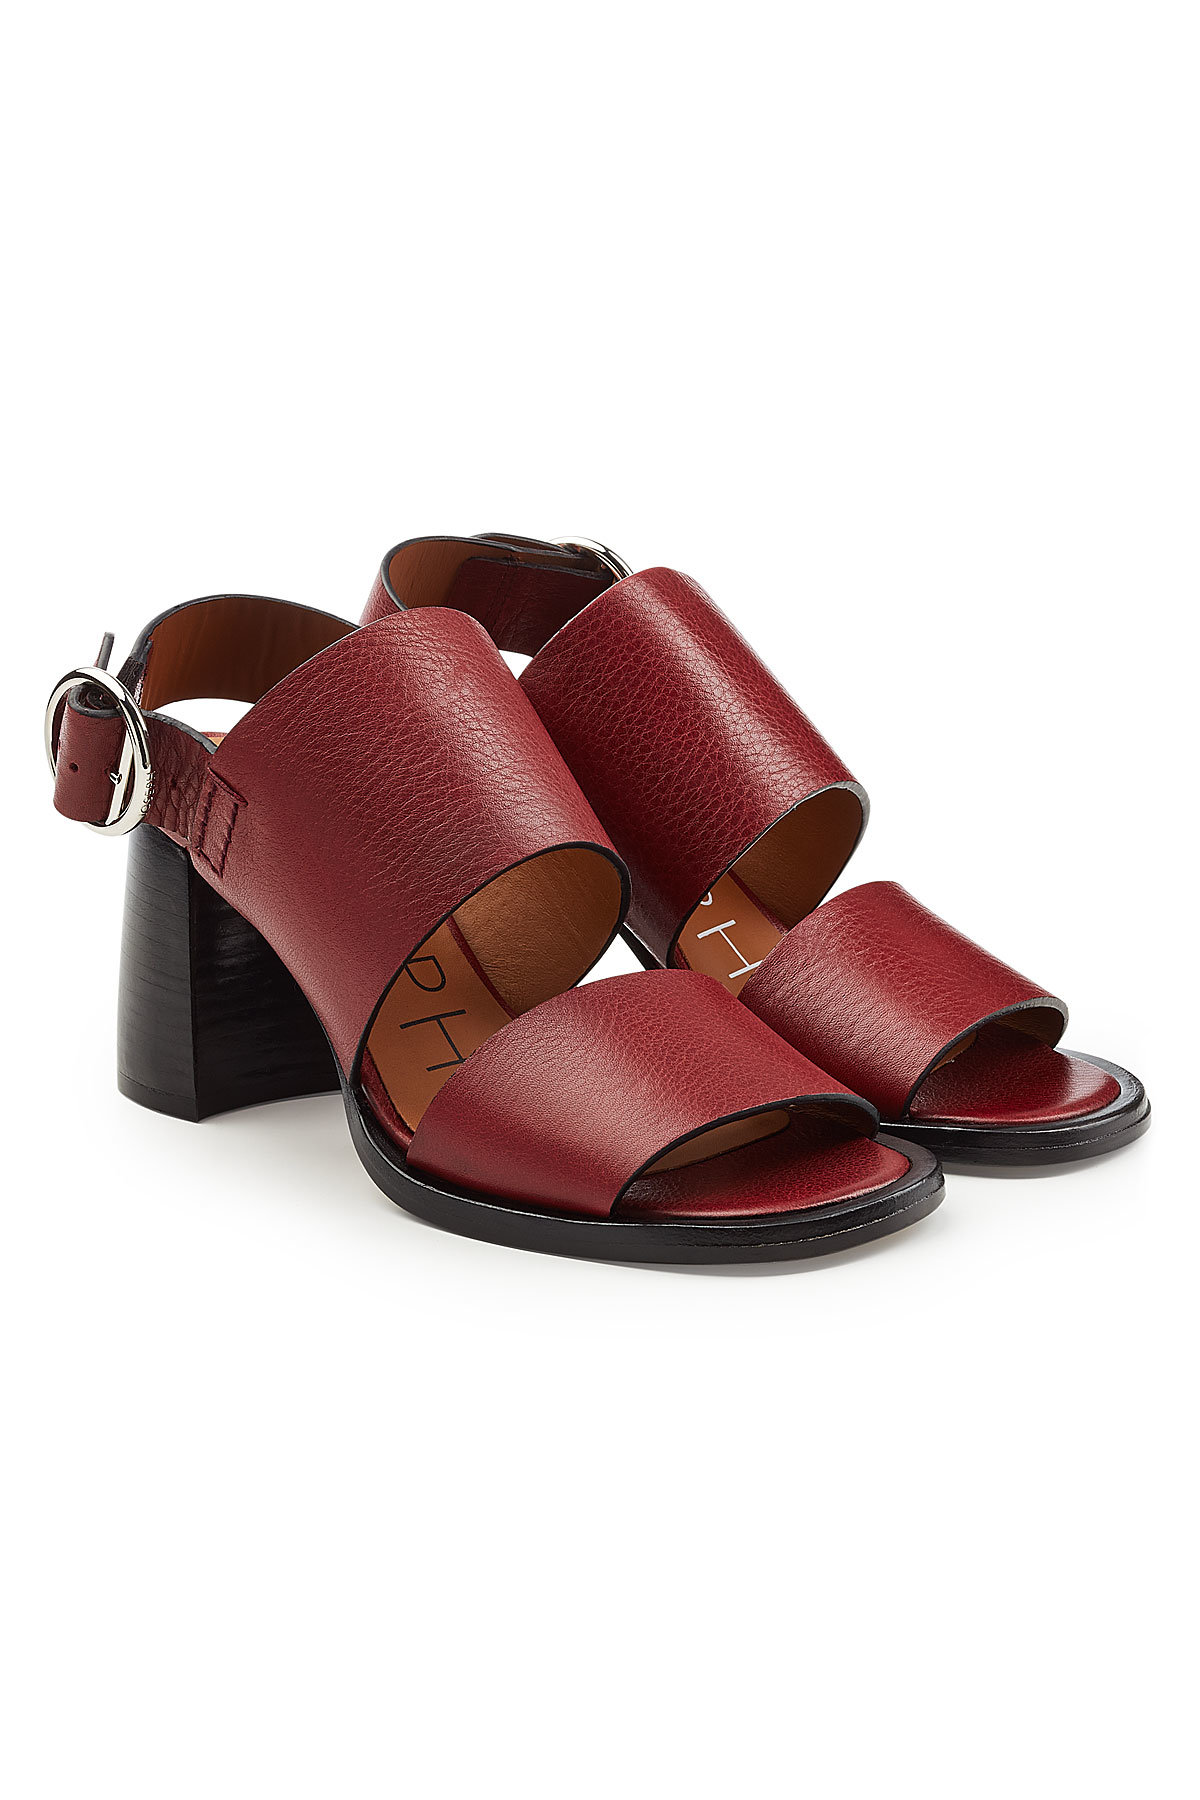 Stein Leather Sandals by Joseph